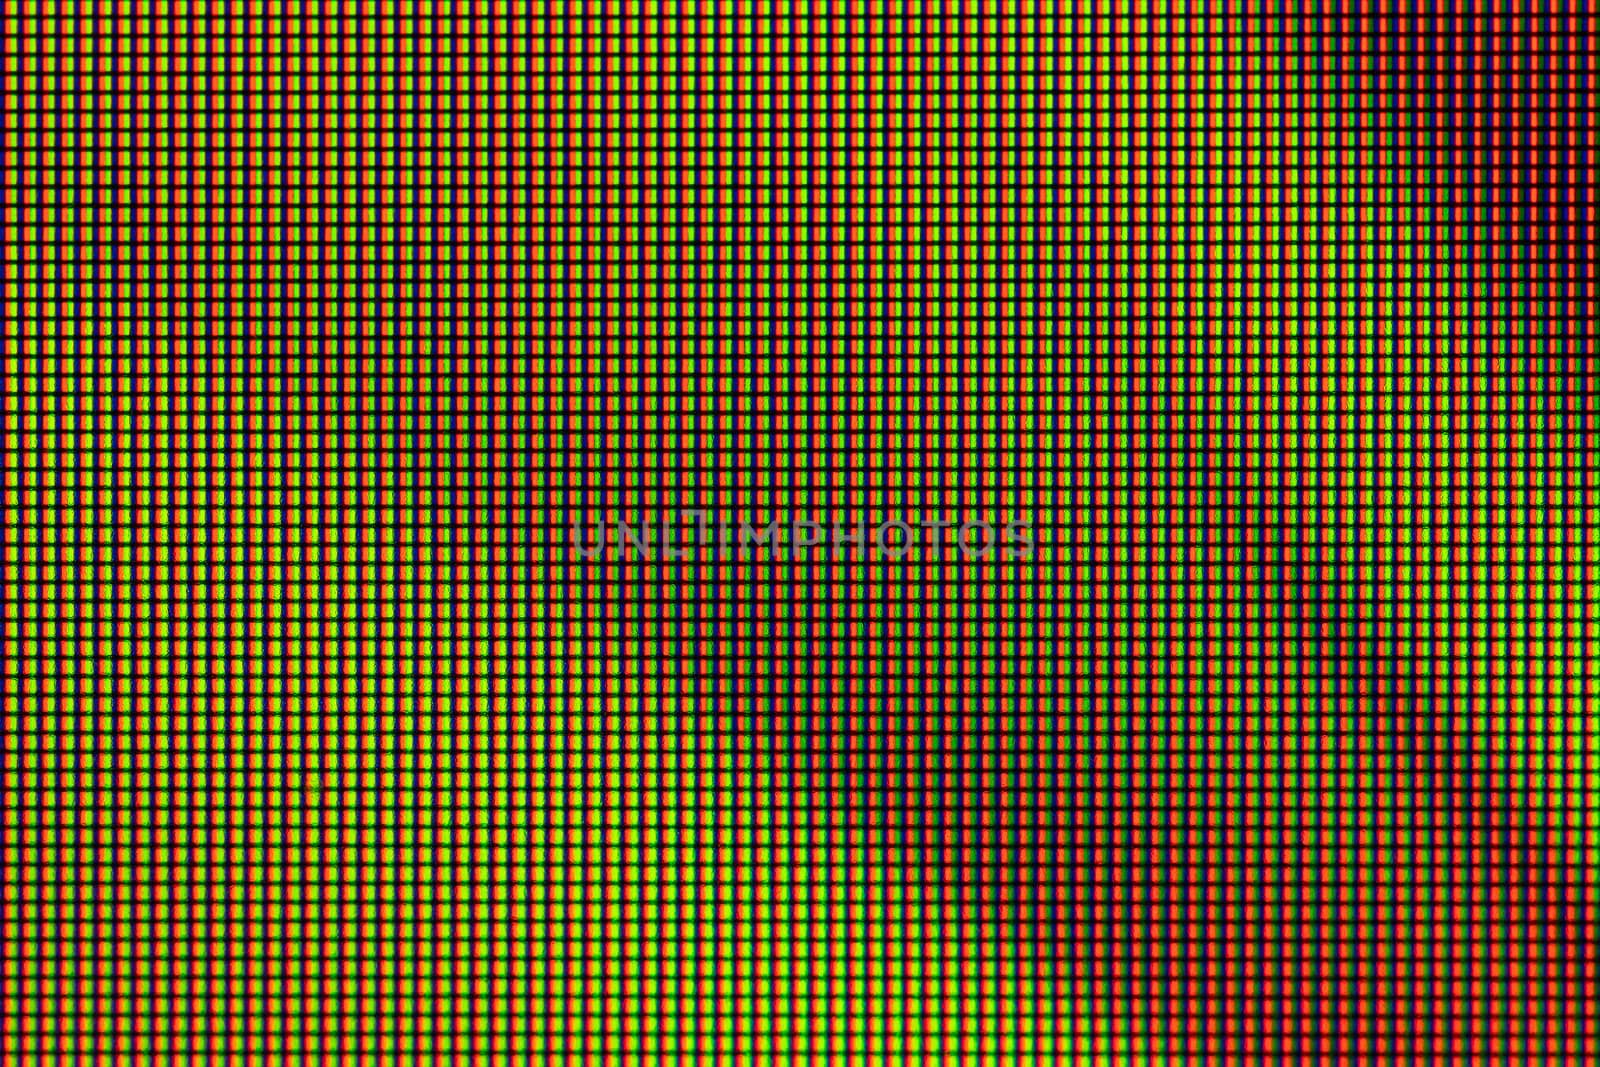 Closeup RGB LED diode from LED TV or LED monitor computer screen by phanthit